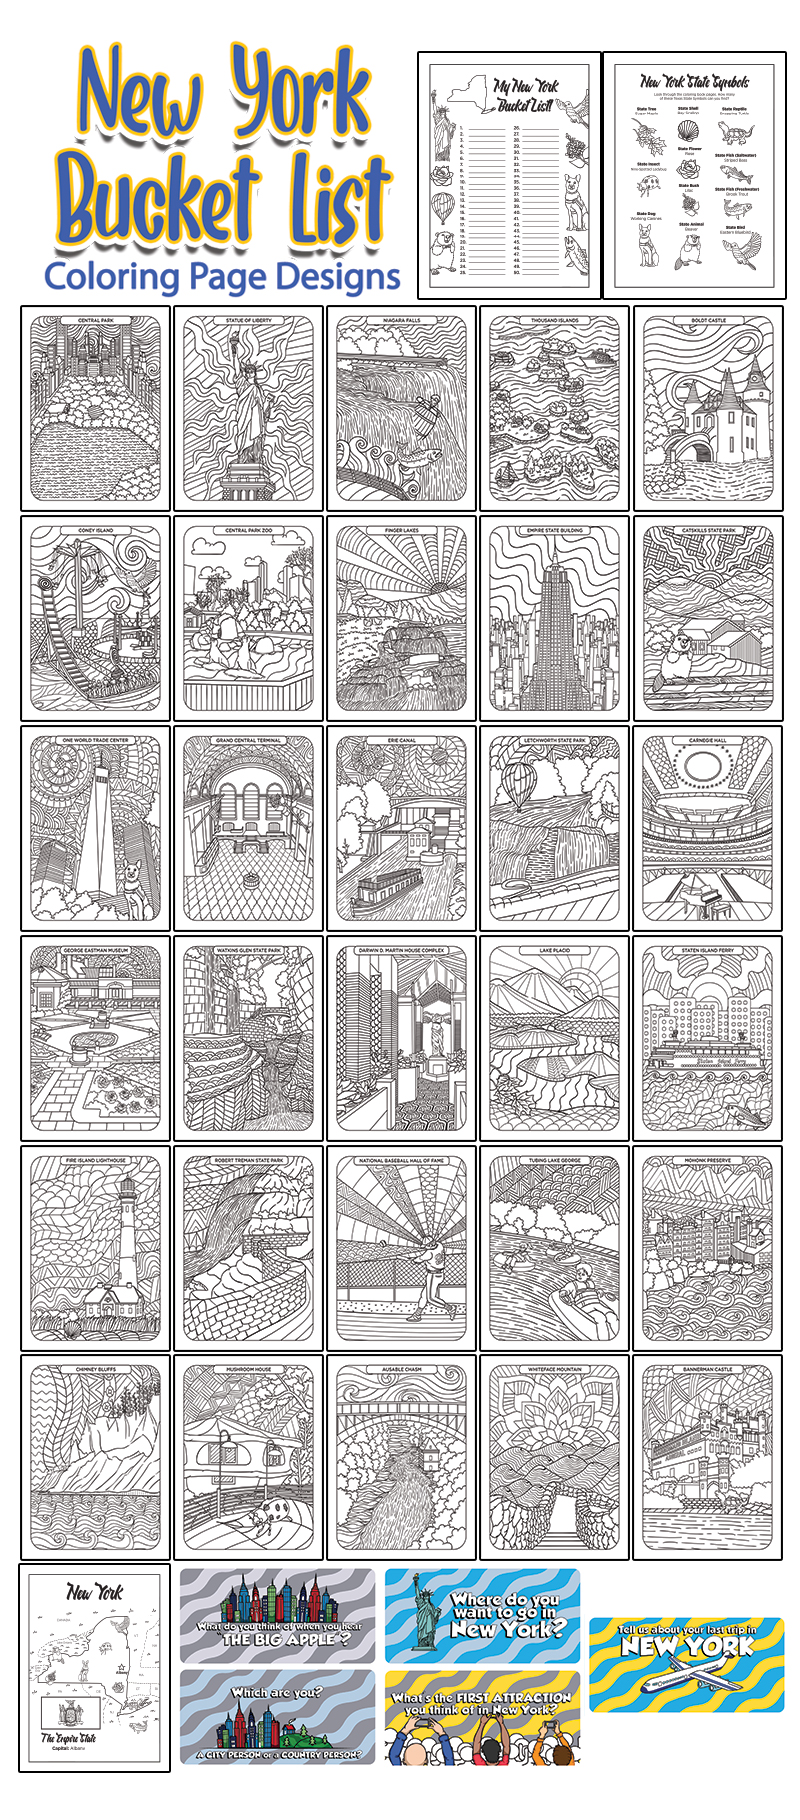 a complete image showing smaller images of all the coloring pages in a package about New York bucket list